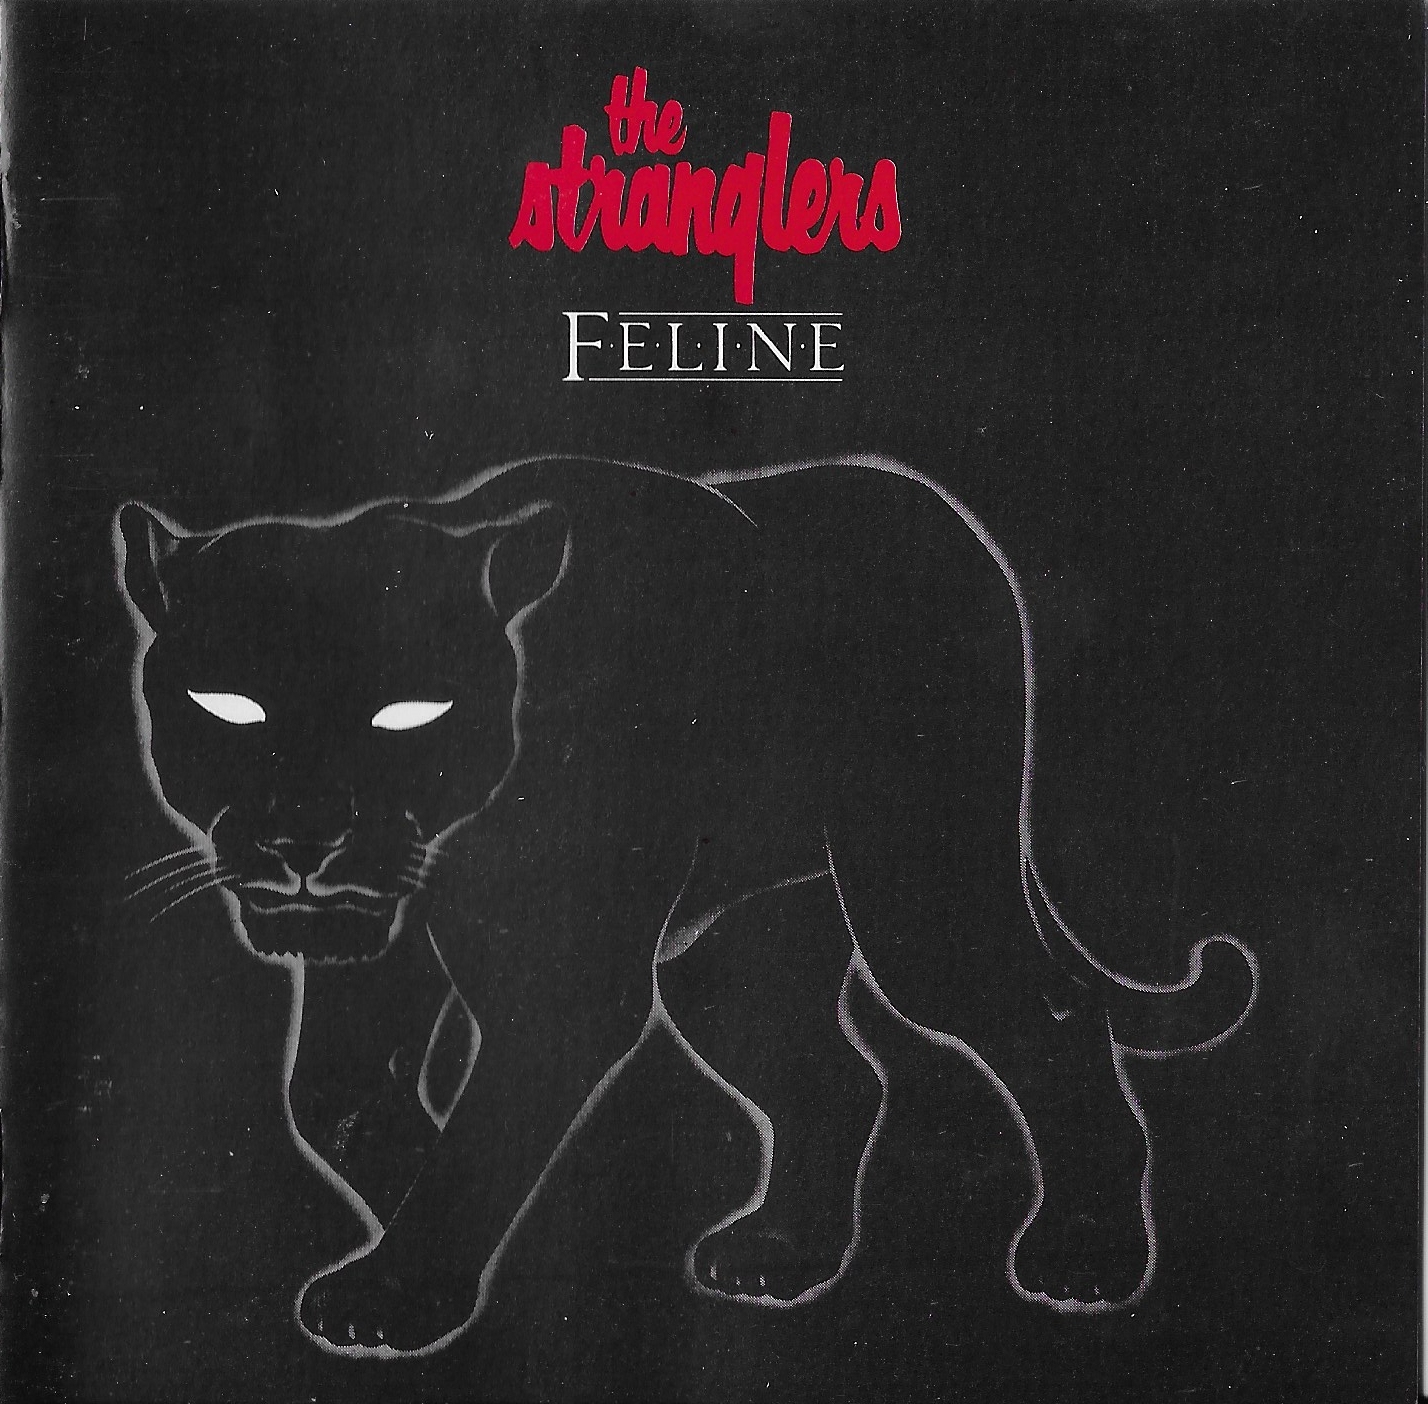 Picture of CDEPC 25237 Feline by artist The Stranglers from The Stranglers